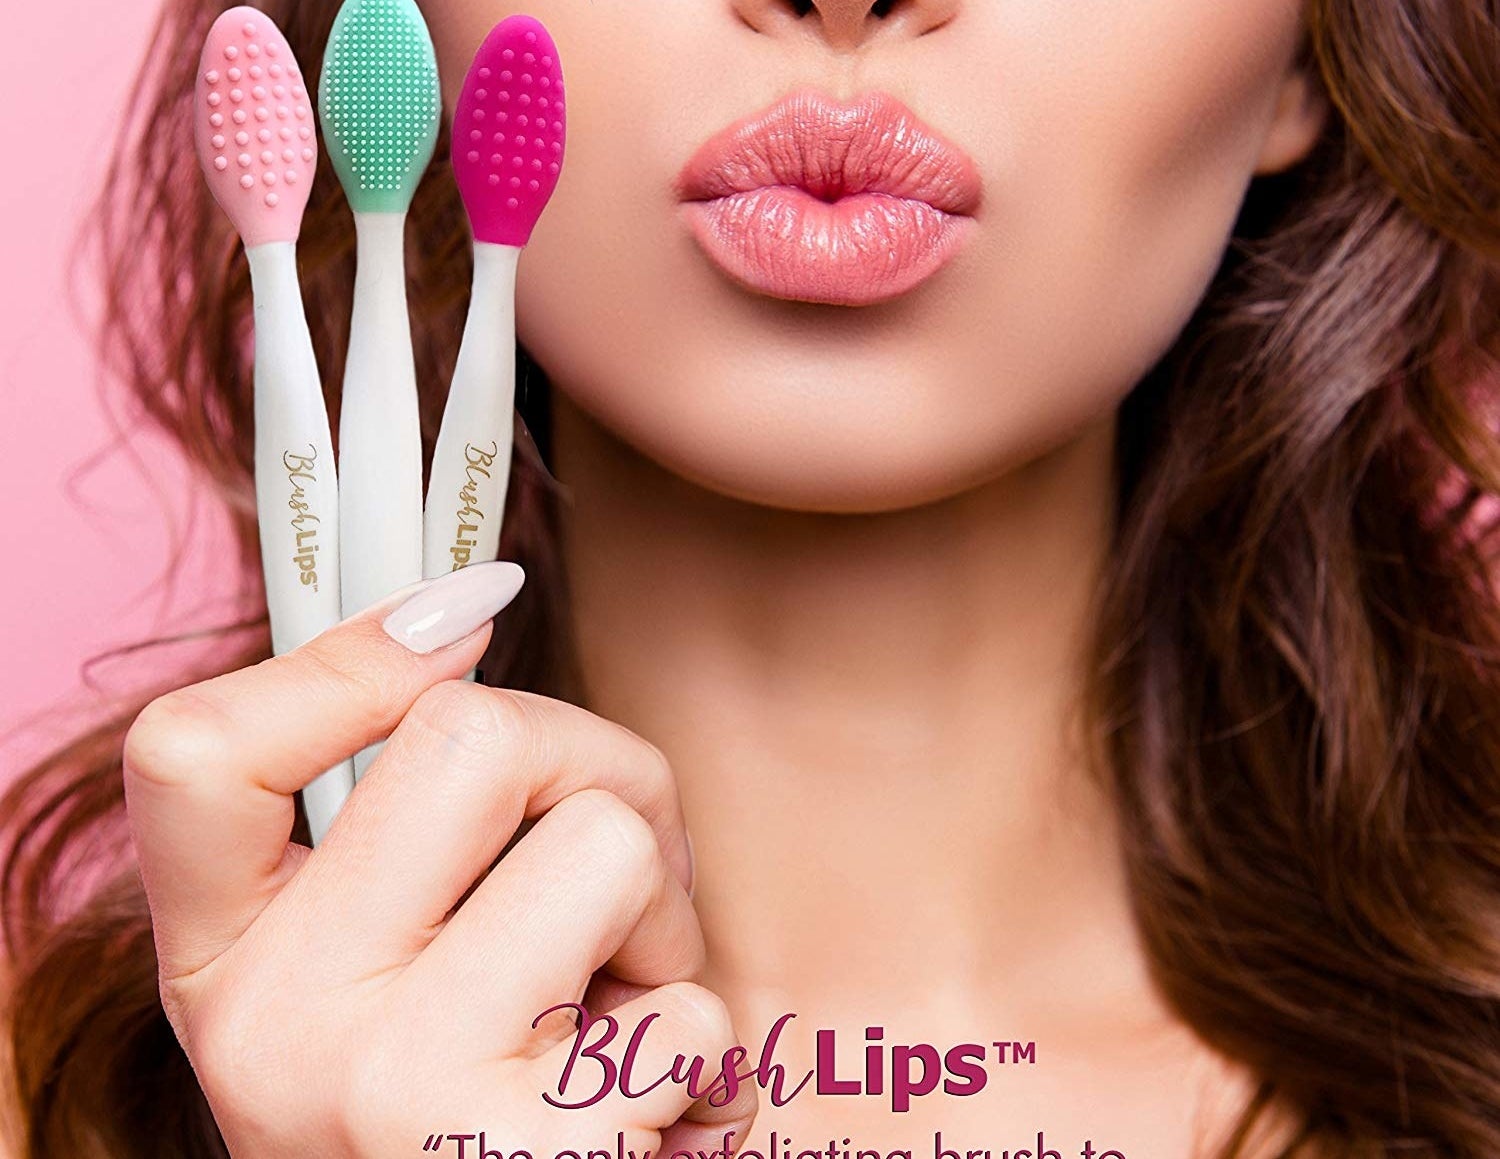 A model holding three brushes with textured silicone backs and puckering their lips